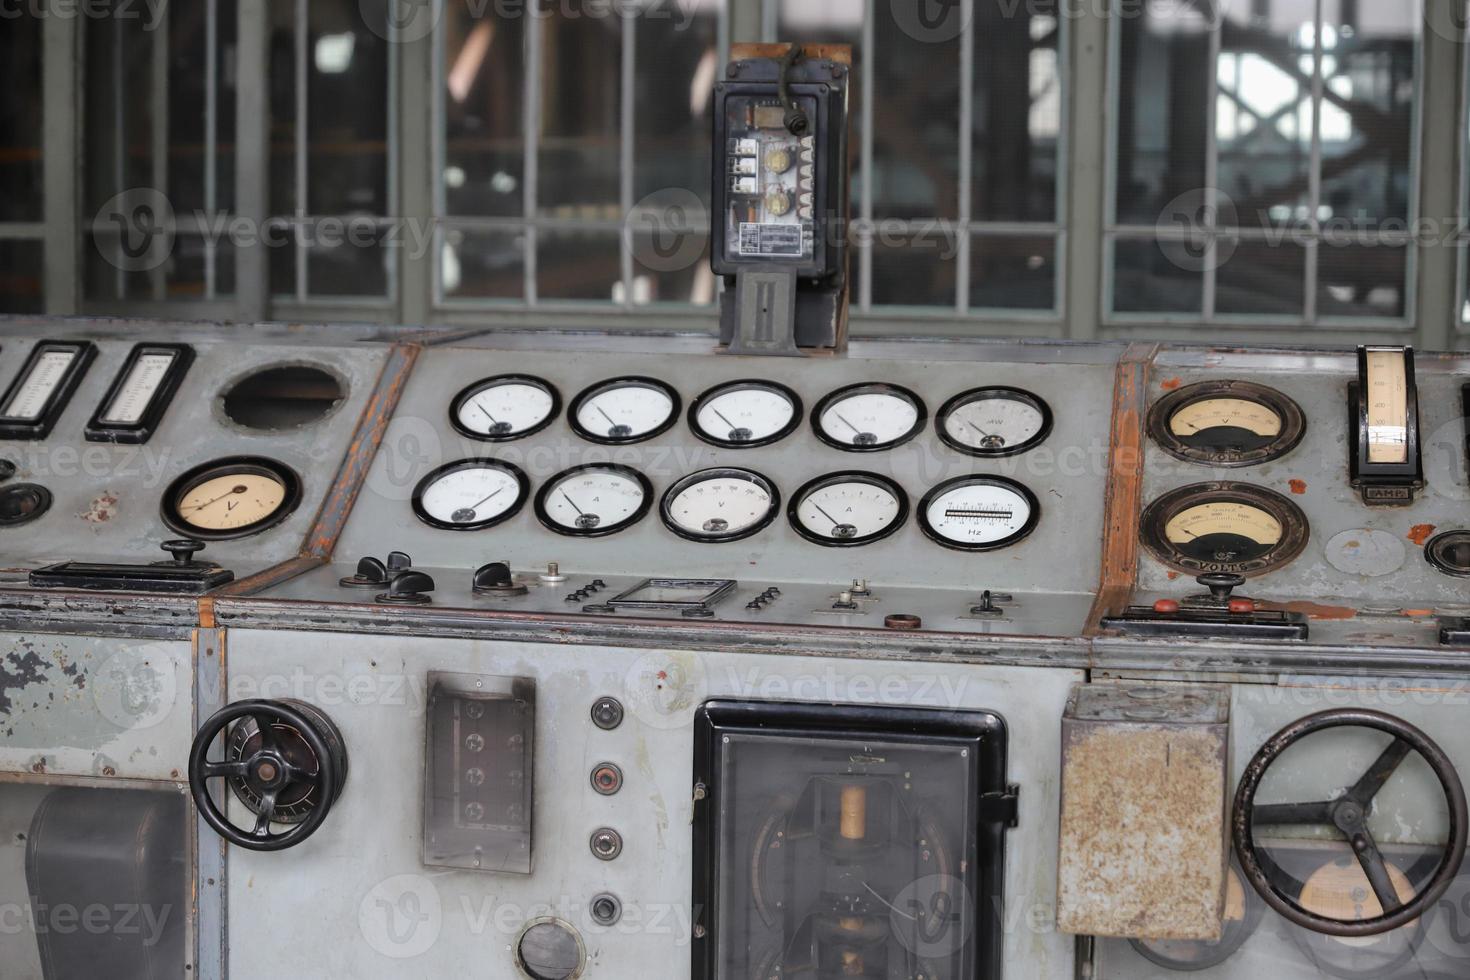 Control Panel of an old Power Plant photo